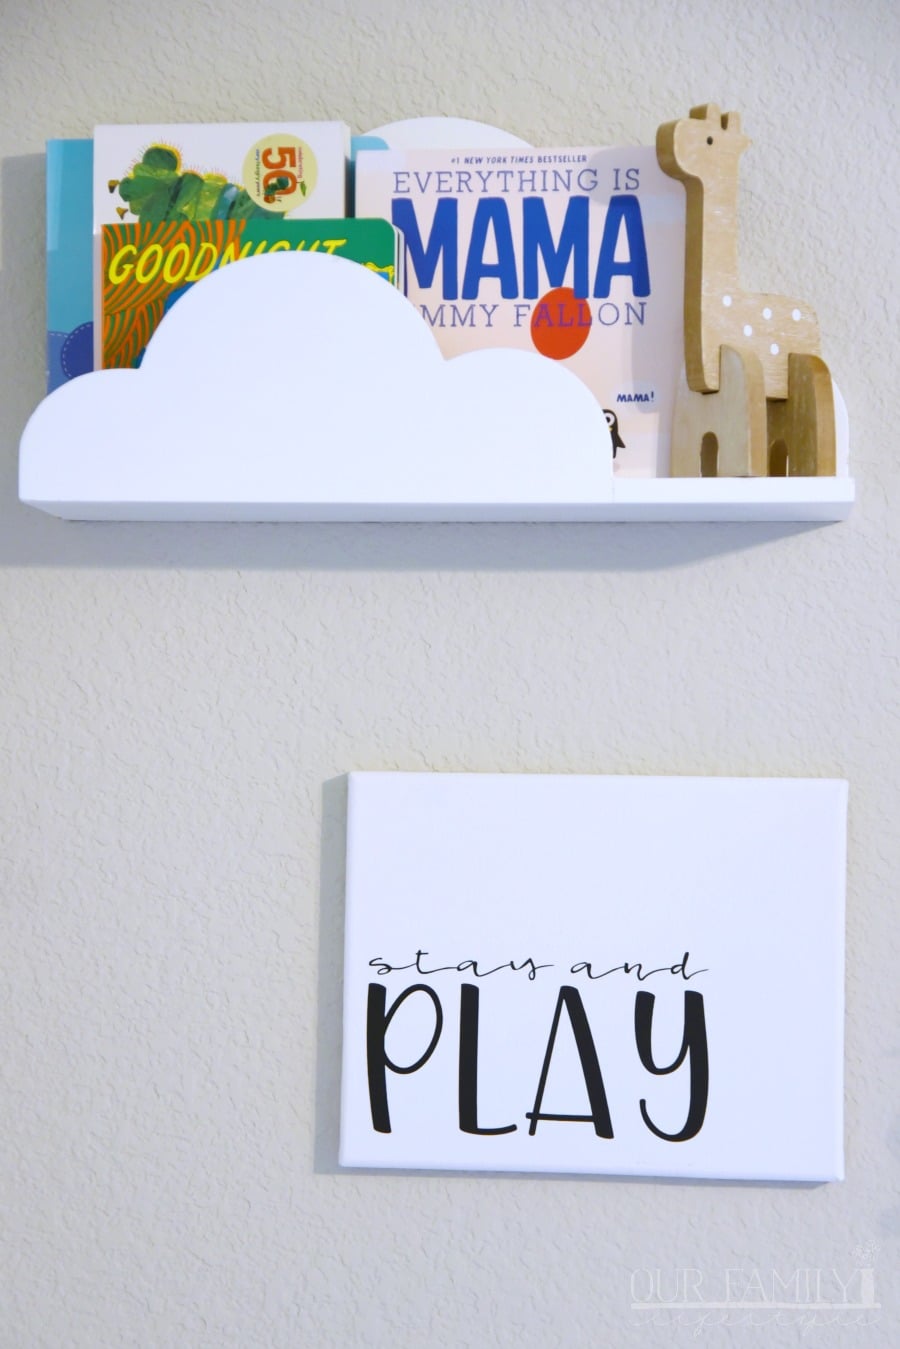 Stay and play DIY canvas sign